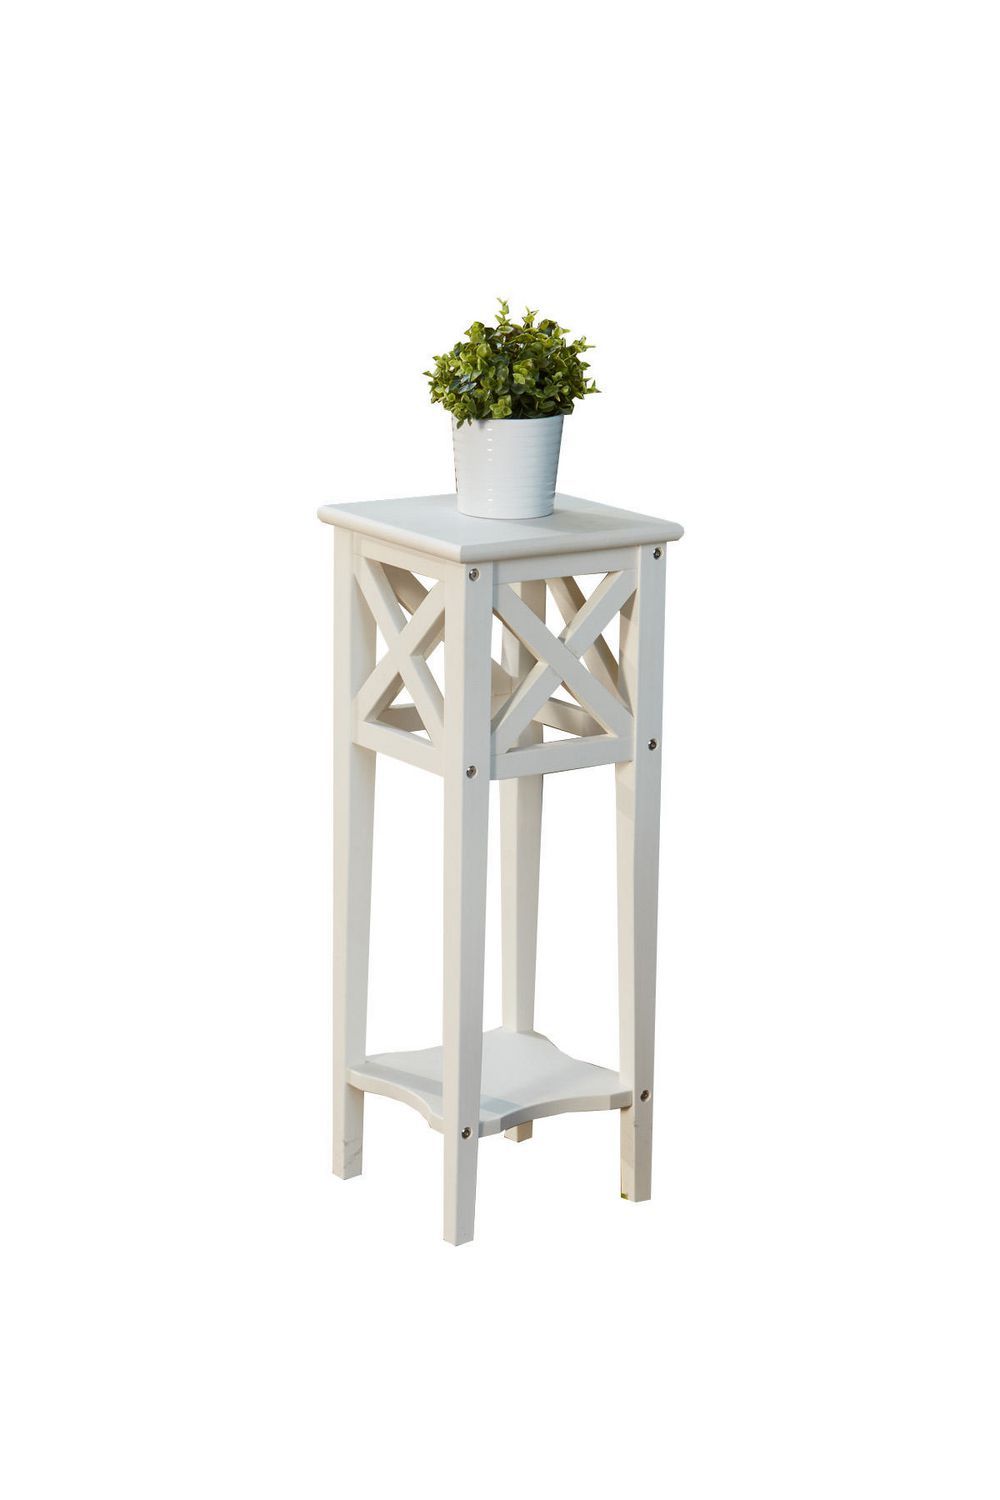 Leisure Design White Ivy Plant Stand | Walmart Canada With Ivory Plant Stands (View 6 of 15)